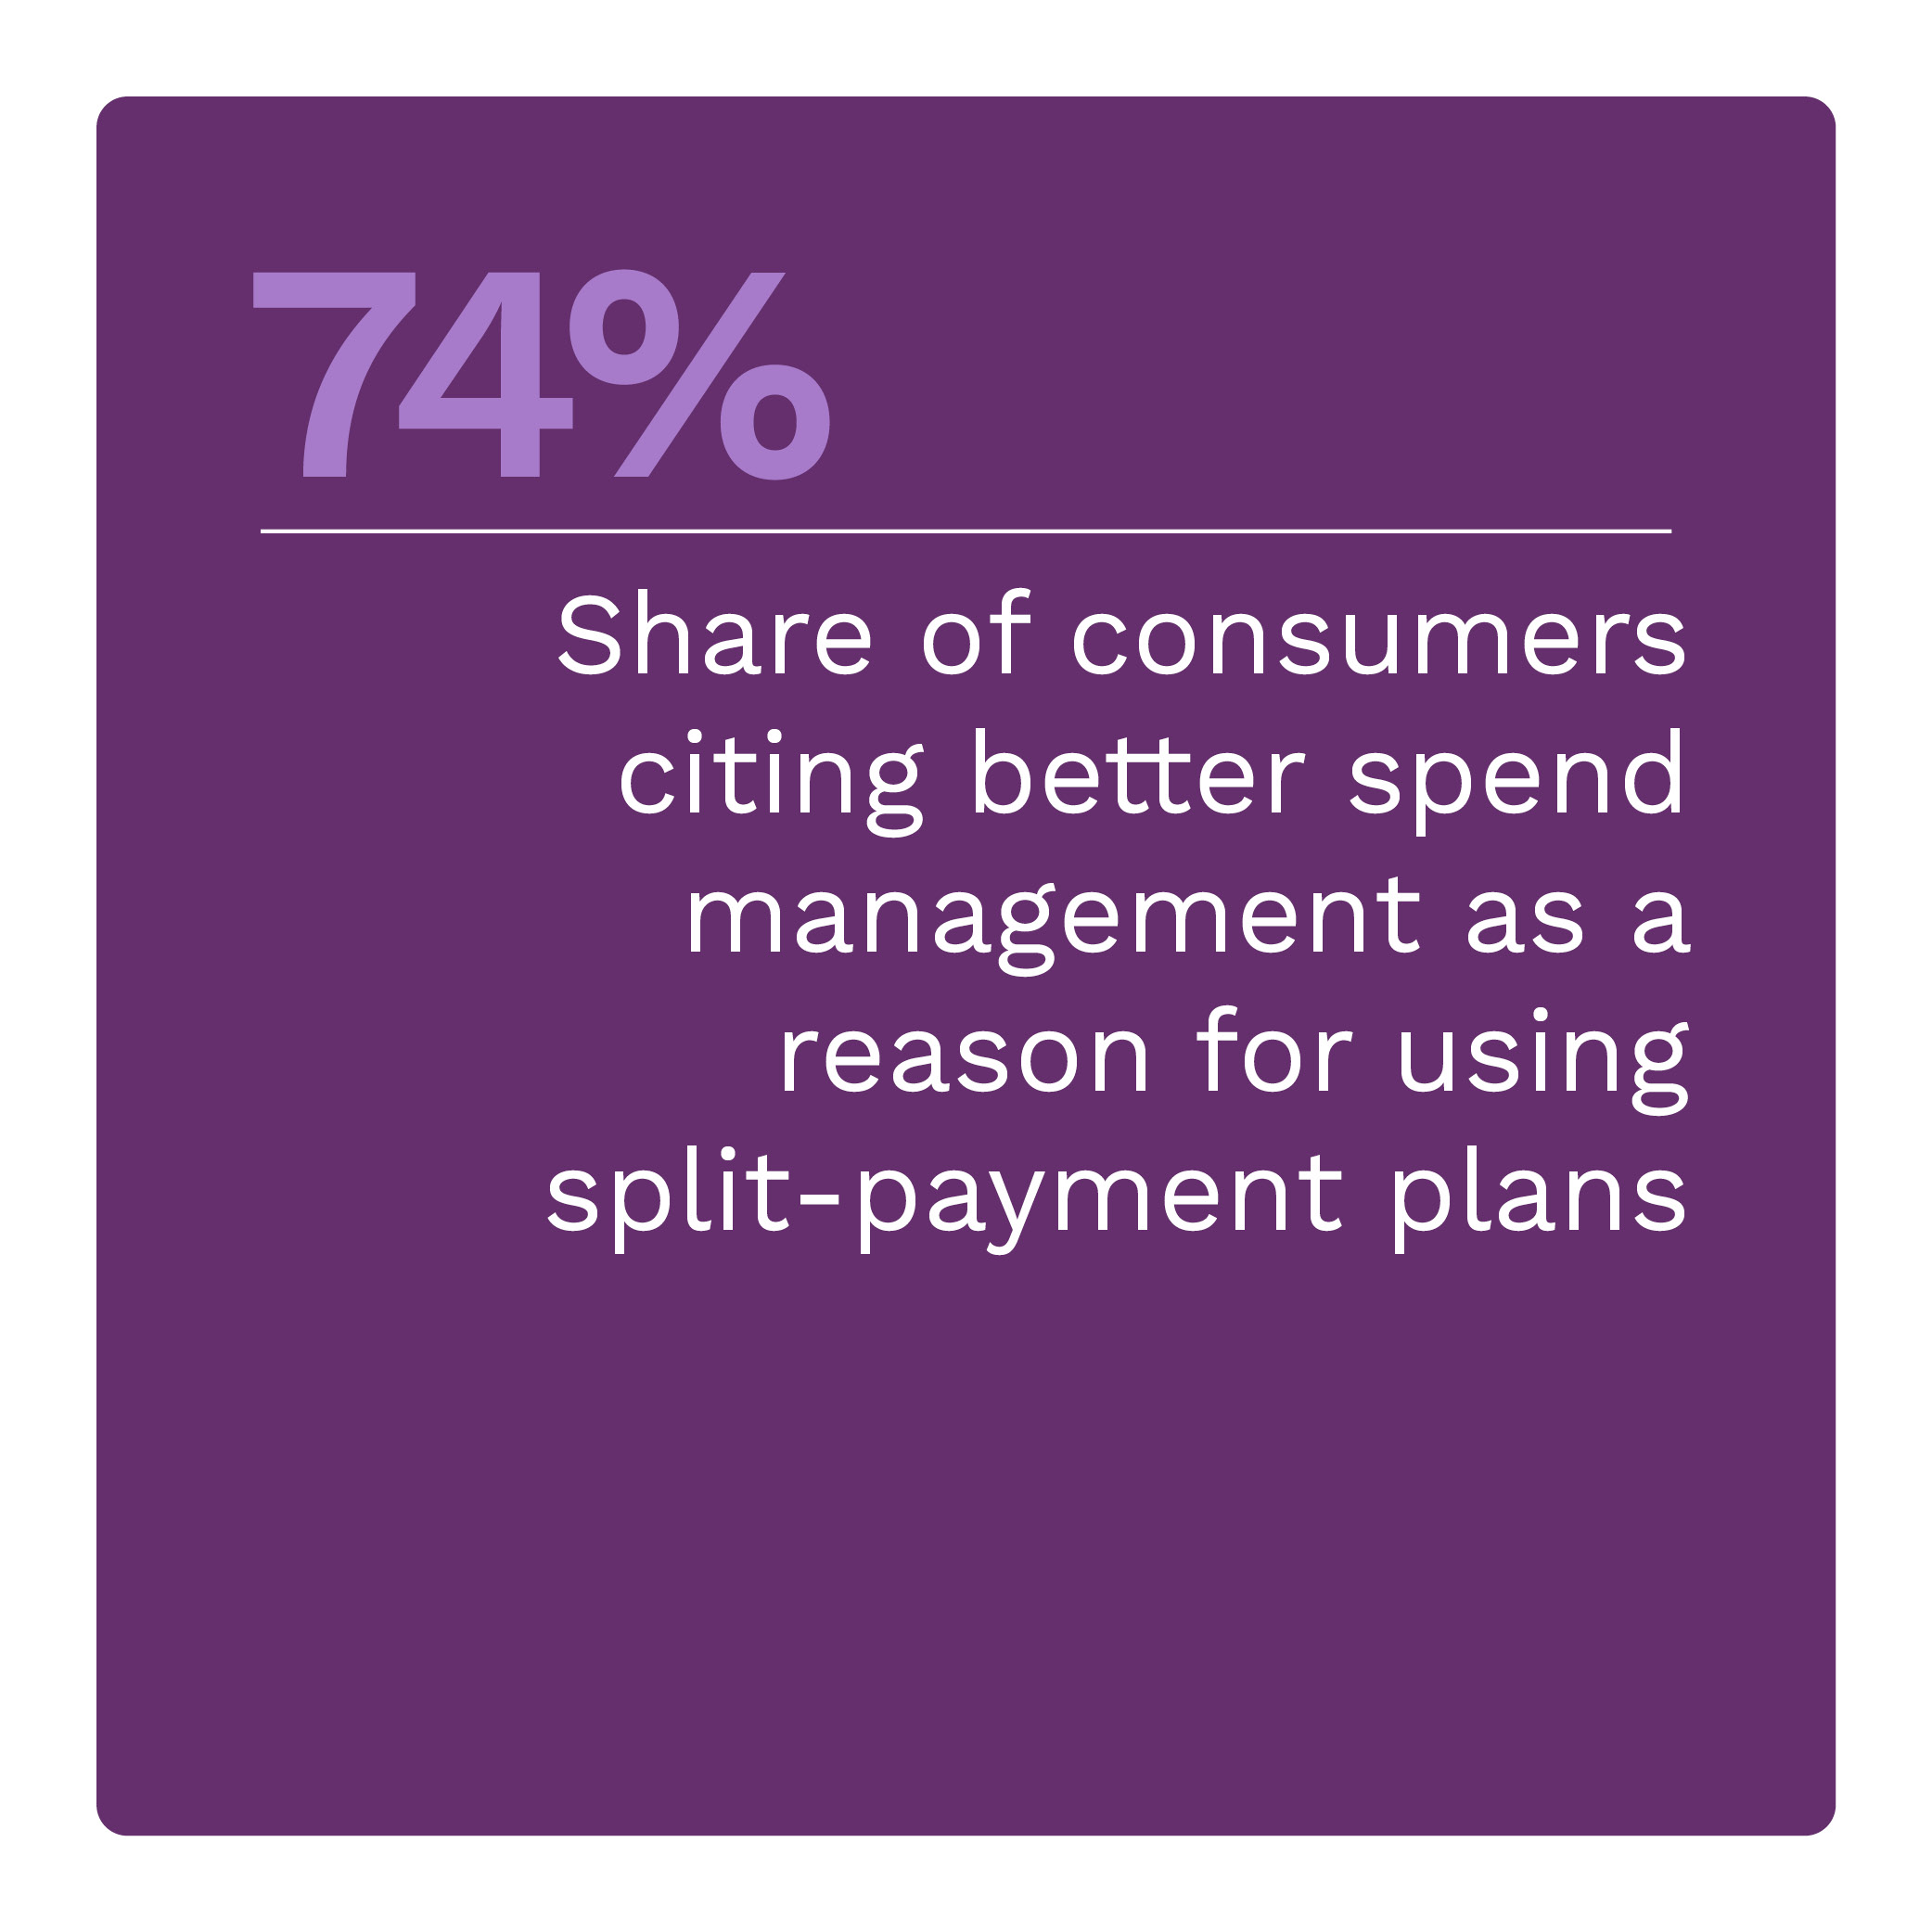 74%: Share of consumers citing better spend management as a reason for using split-payment plans